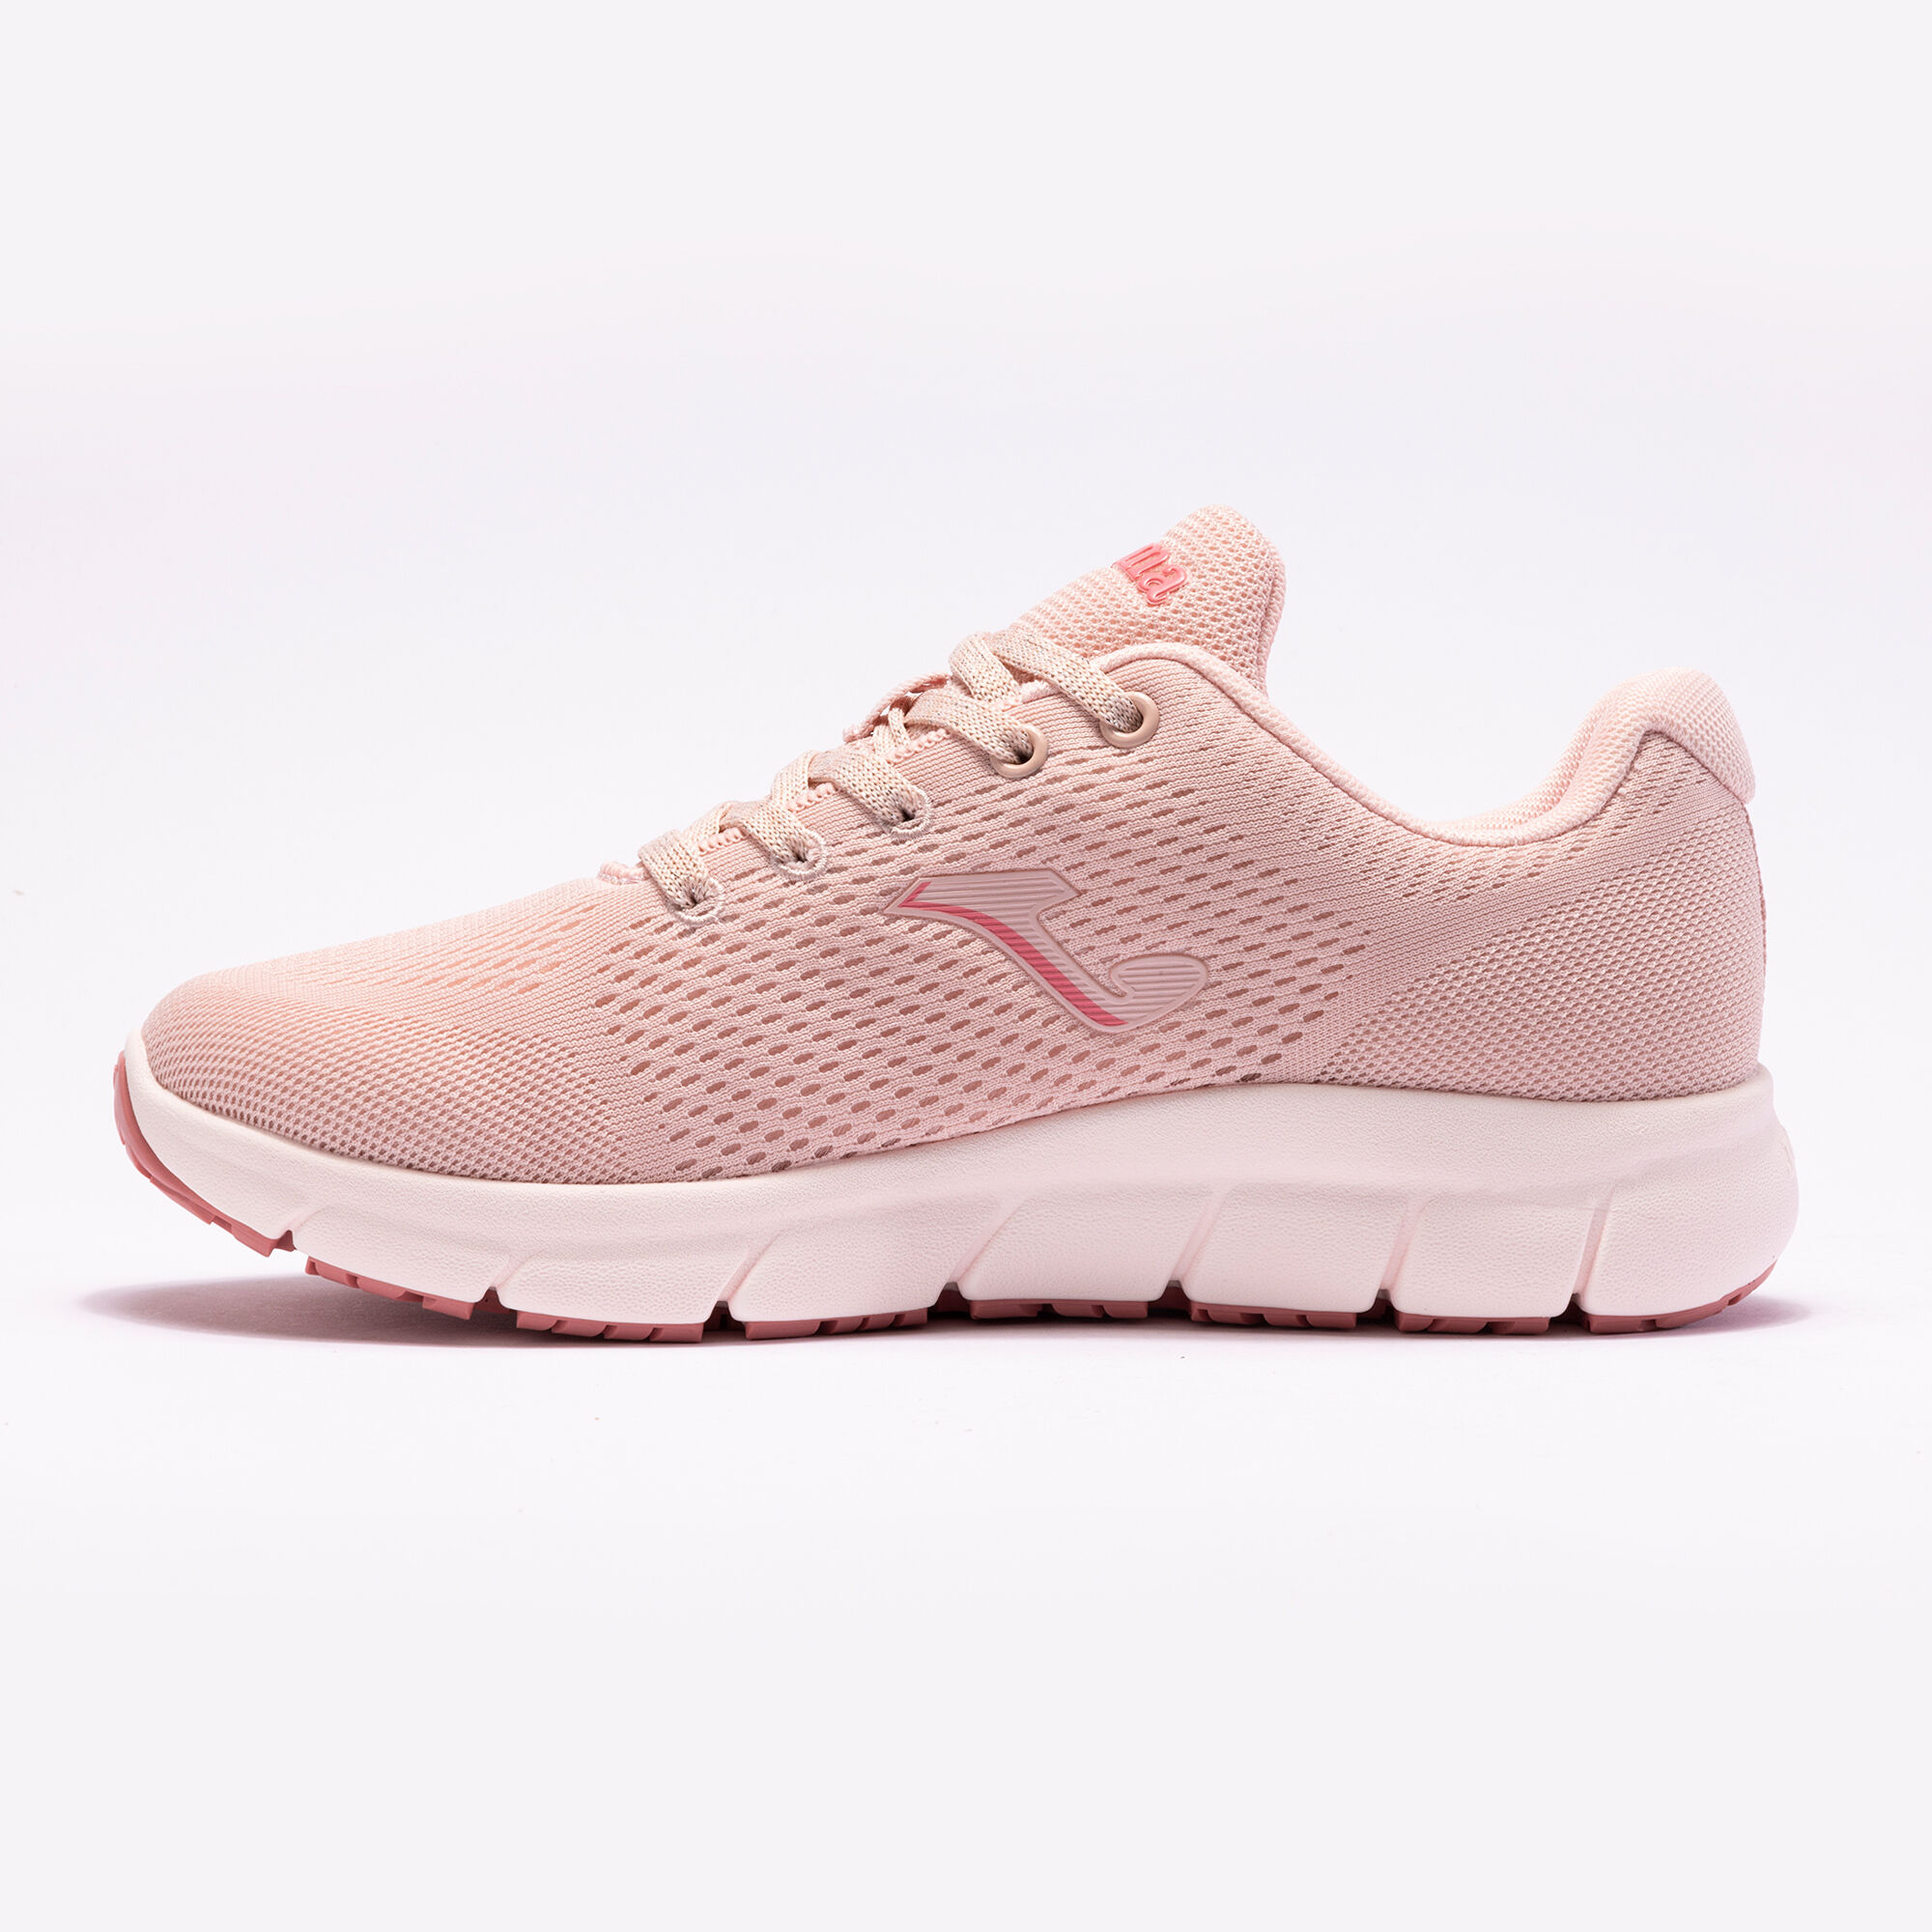 Chaussures casual Zen Lady 24 femme rose clair